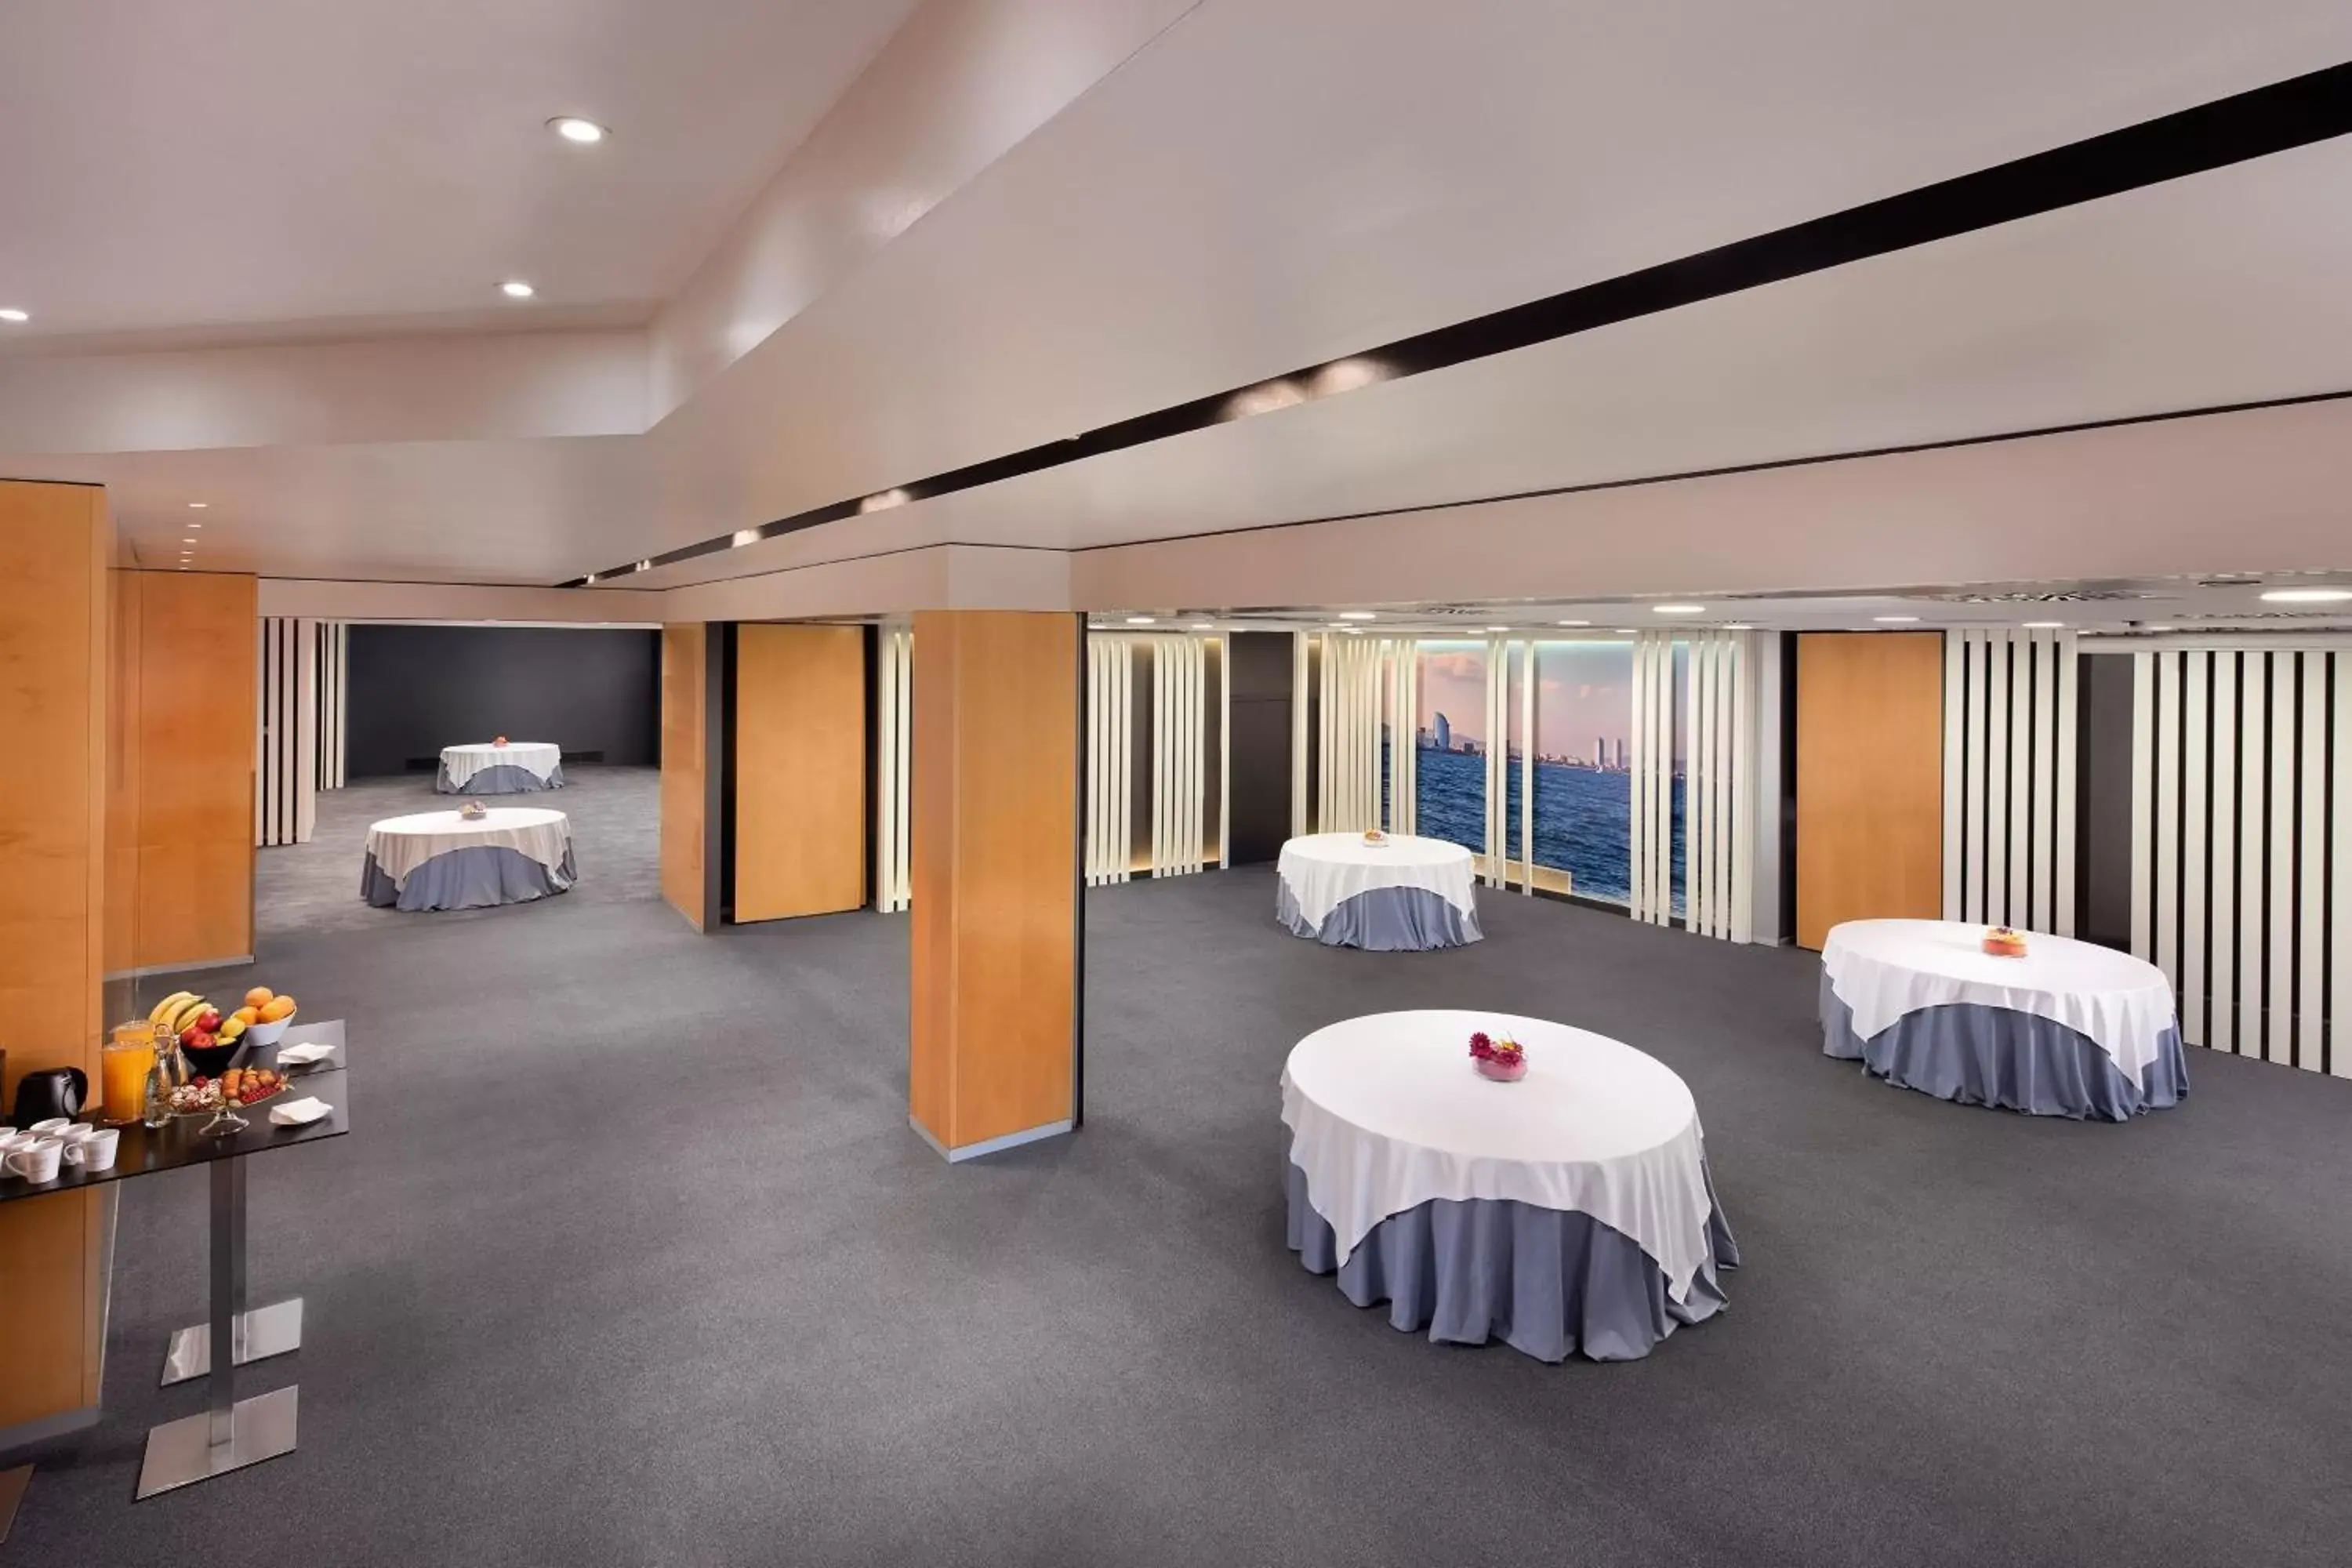 Meeting/conference room, Banquet Facilities in Four Points by Sheraton Barcelona Diagonal